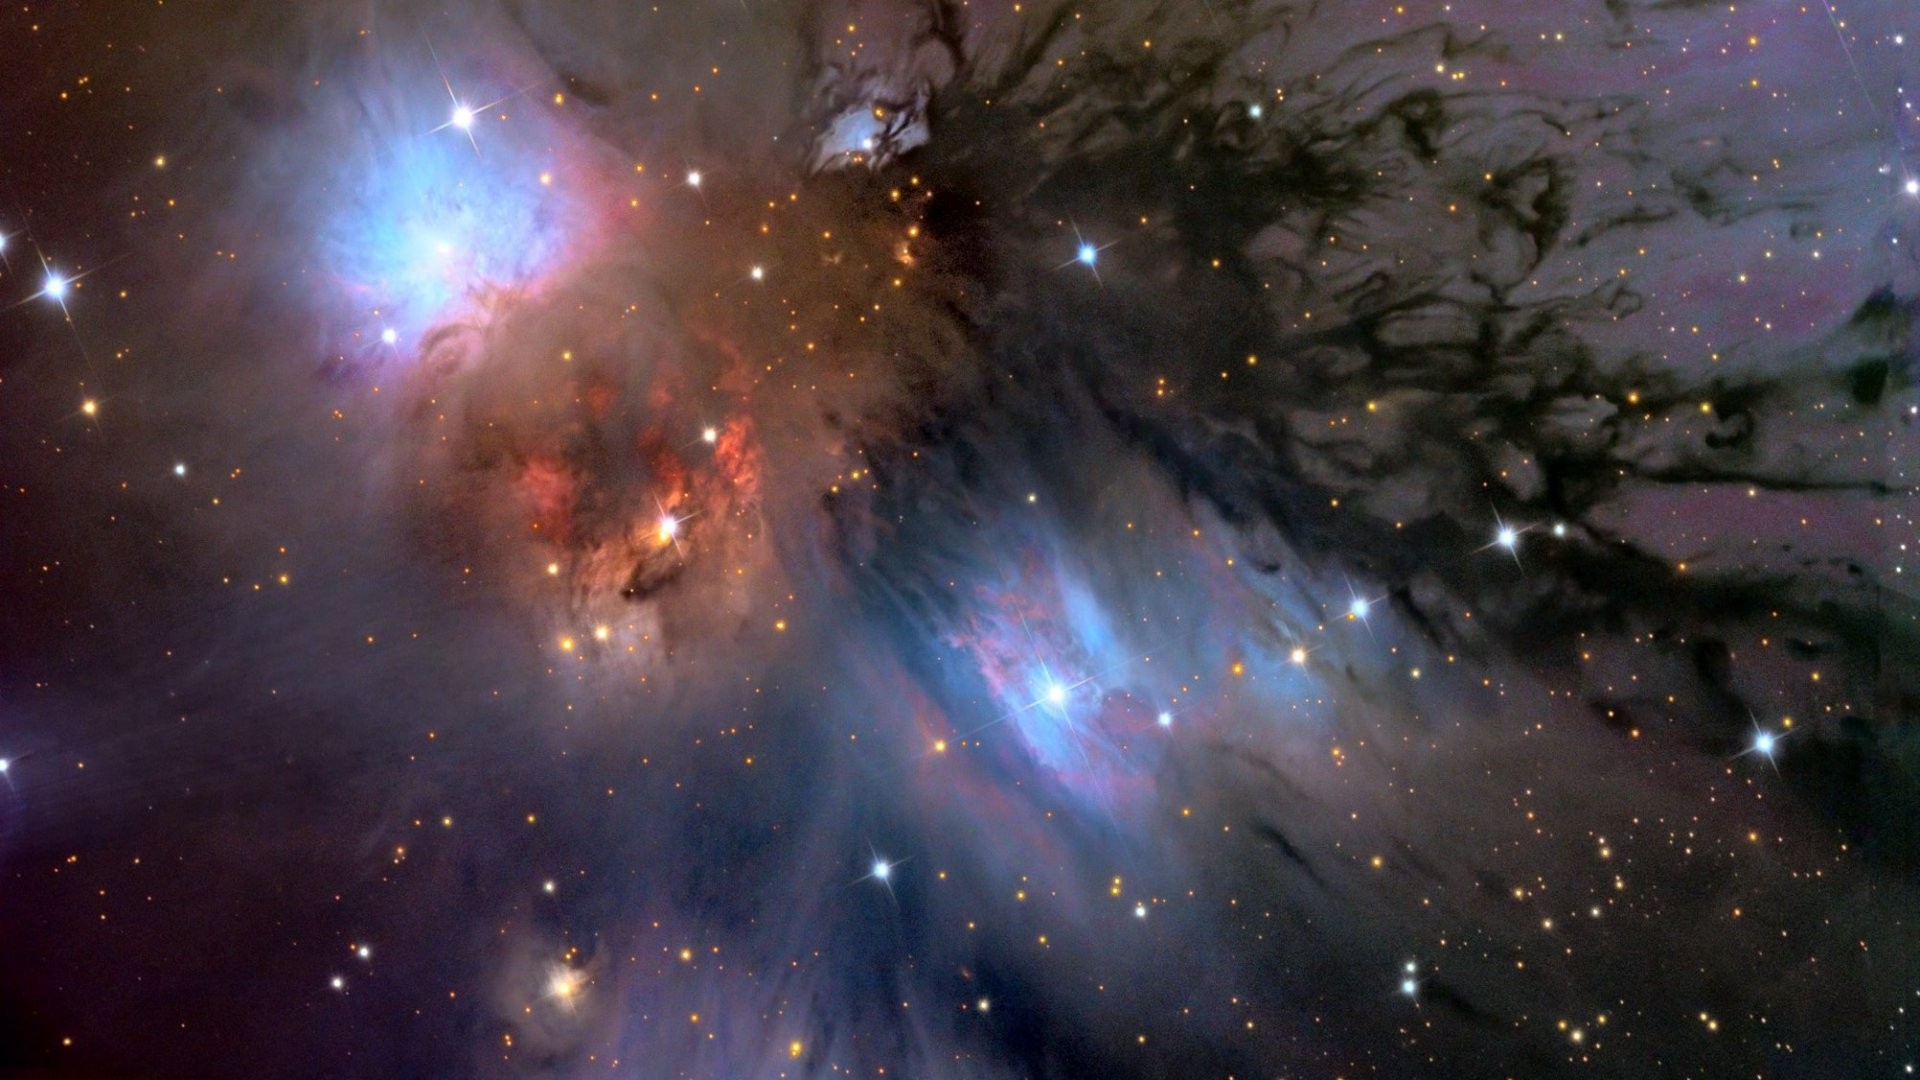 1920x1080 Full HD Hubble Images Collection for Desktop - HD Wallpapers